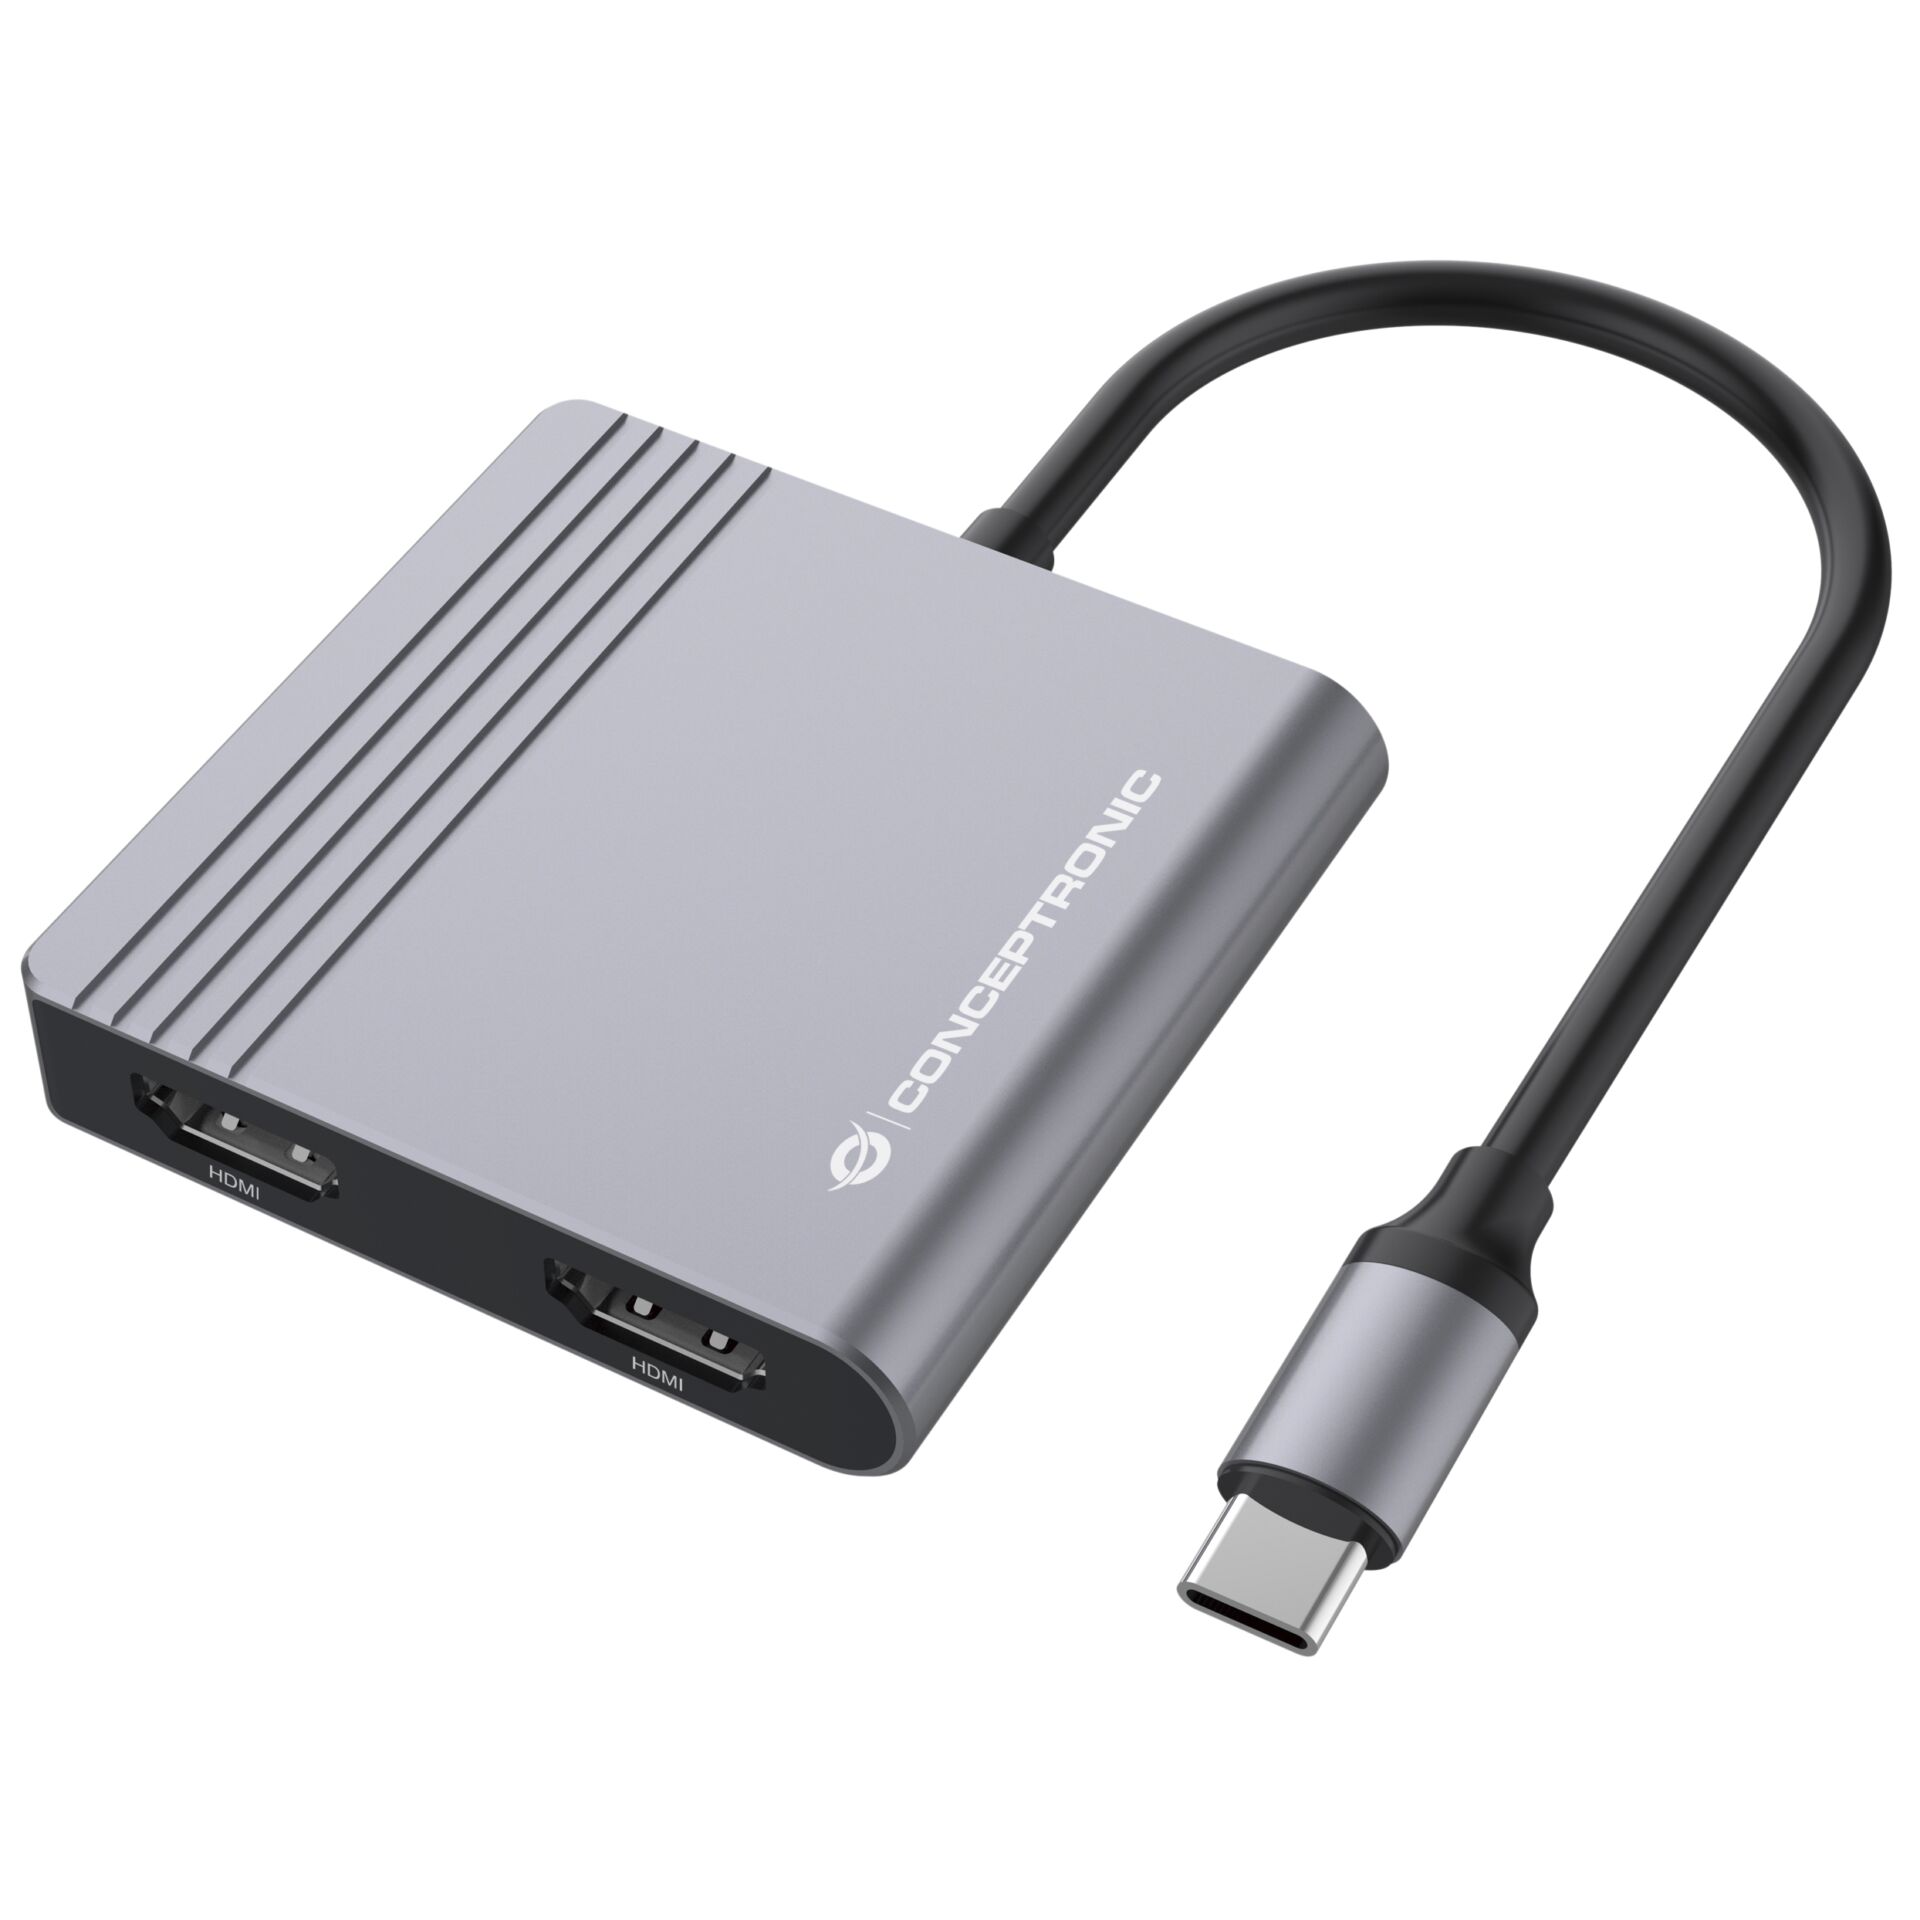 Conceptronic DONN13G 4-in-1 USB 3.2 Docking